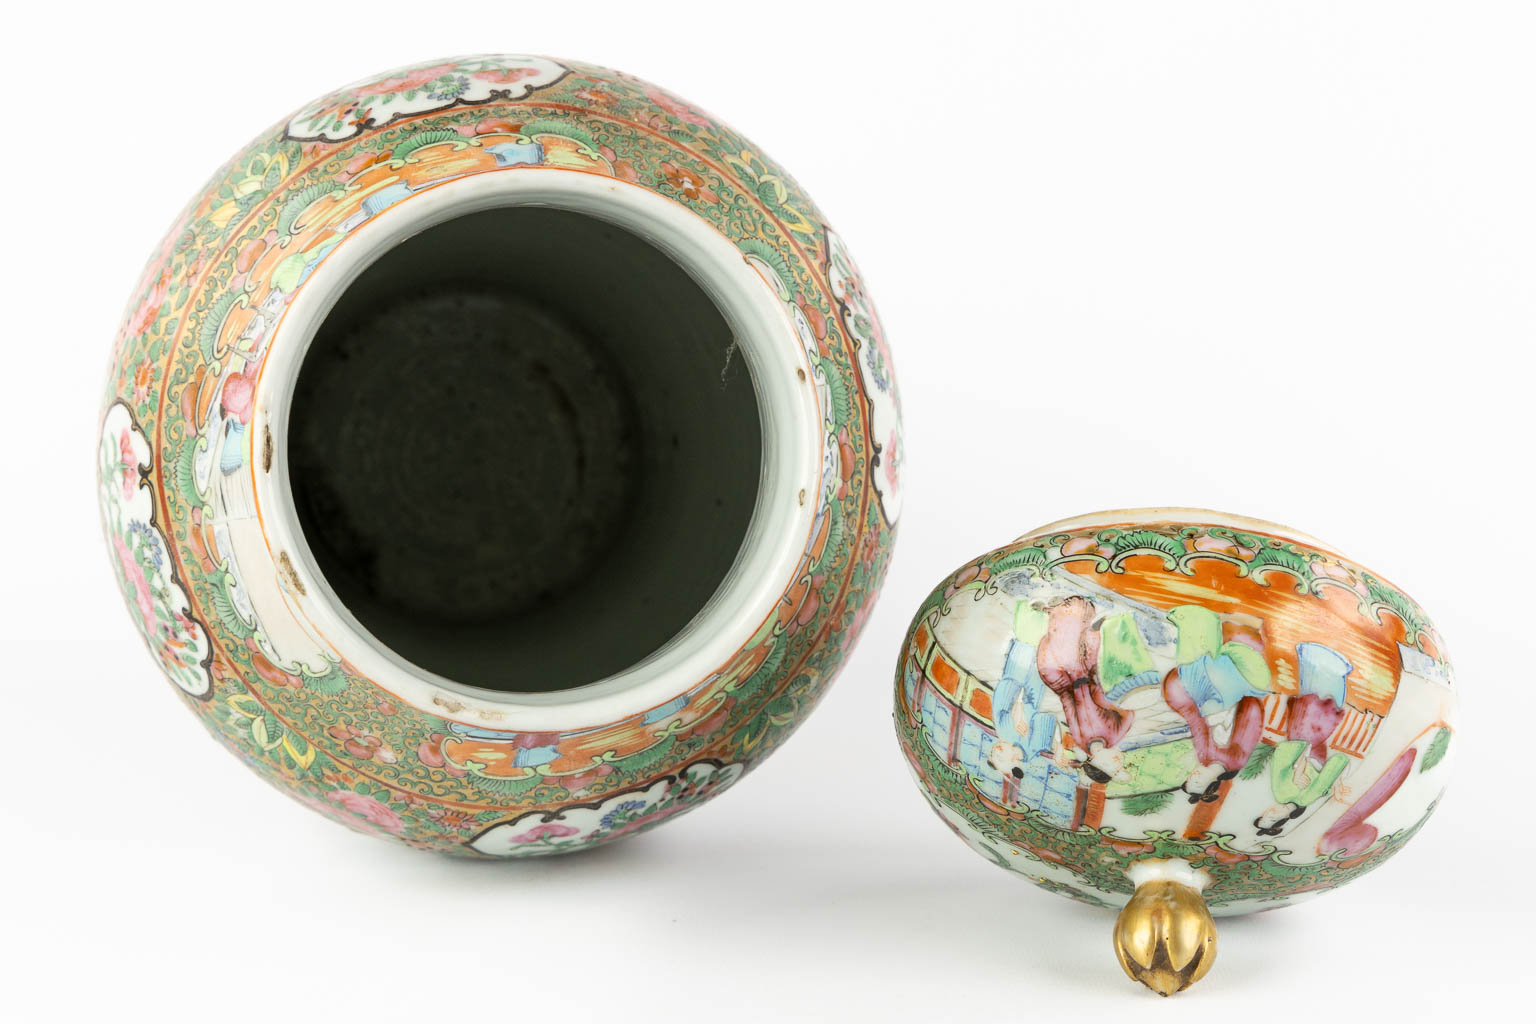 A Chinese Canton vase with a lid, interior scnes with figurines, fauna and flora. 19th/20th C. (H:4 - Image 11 of 19